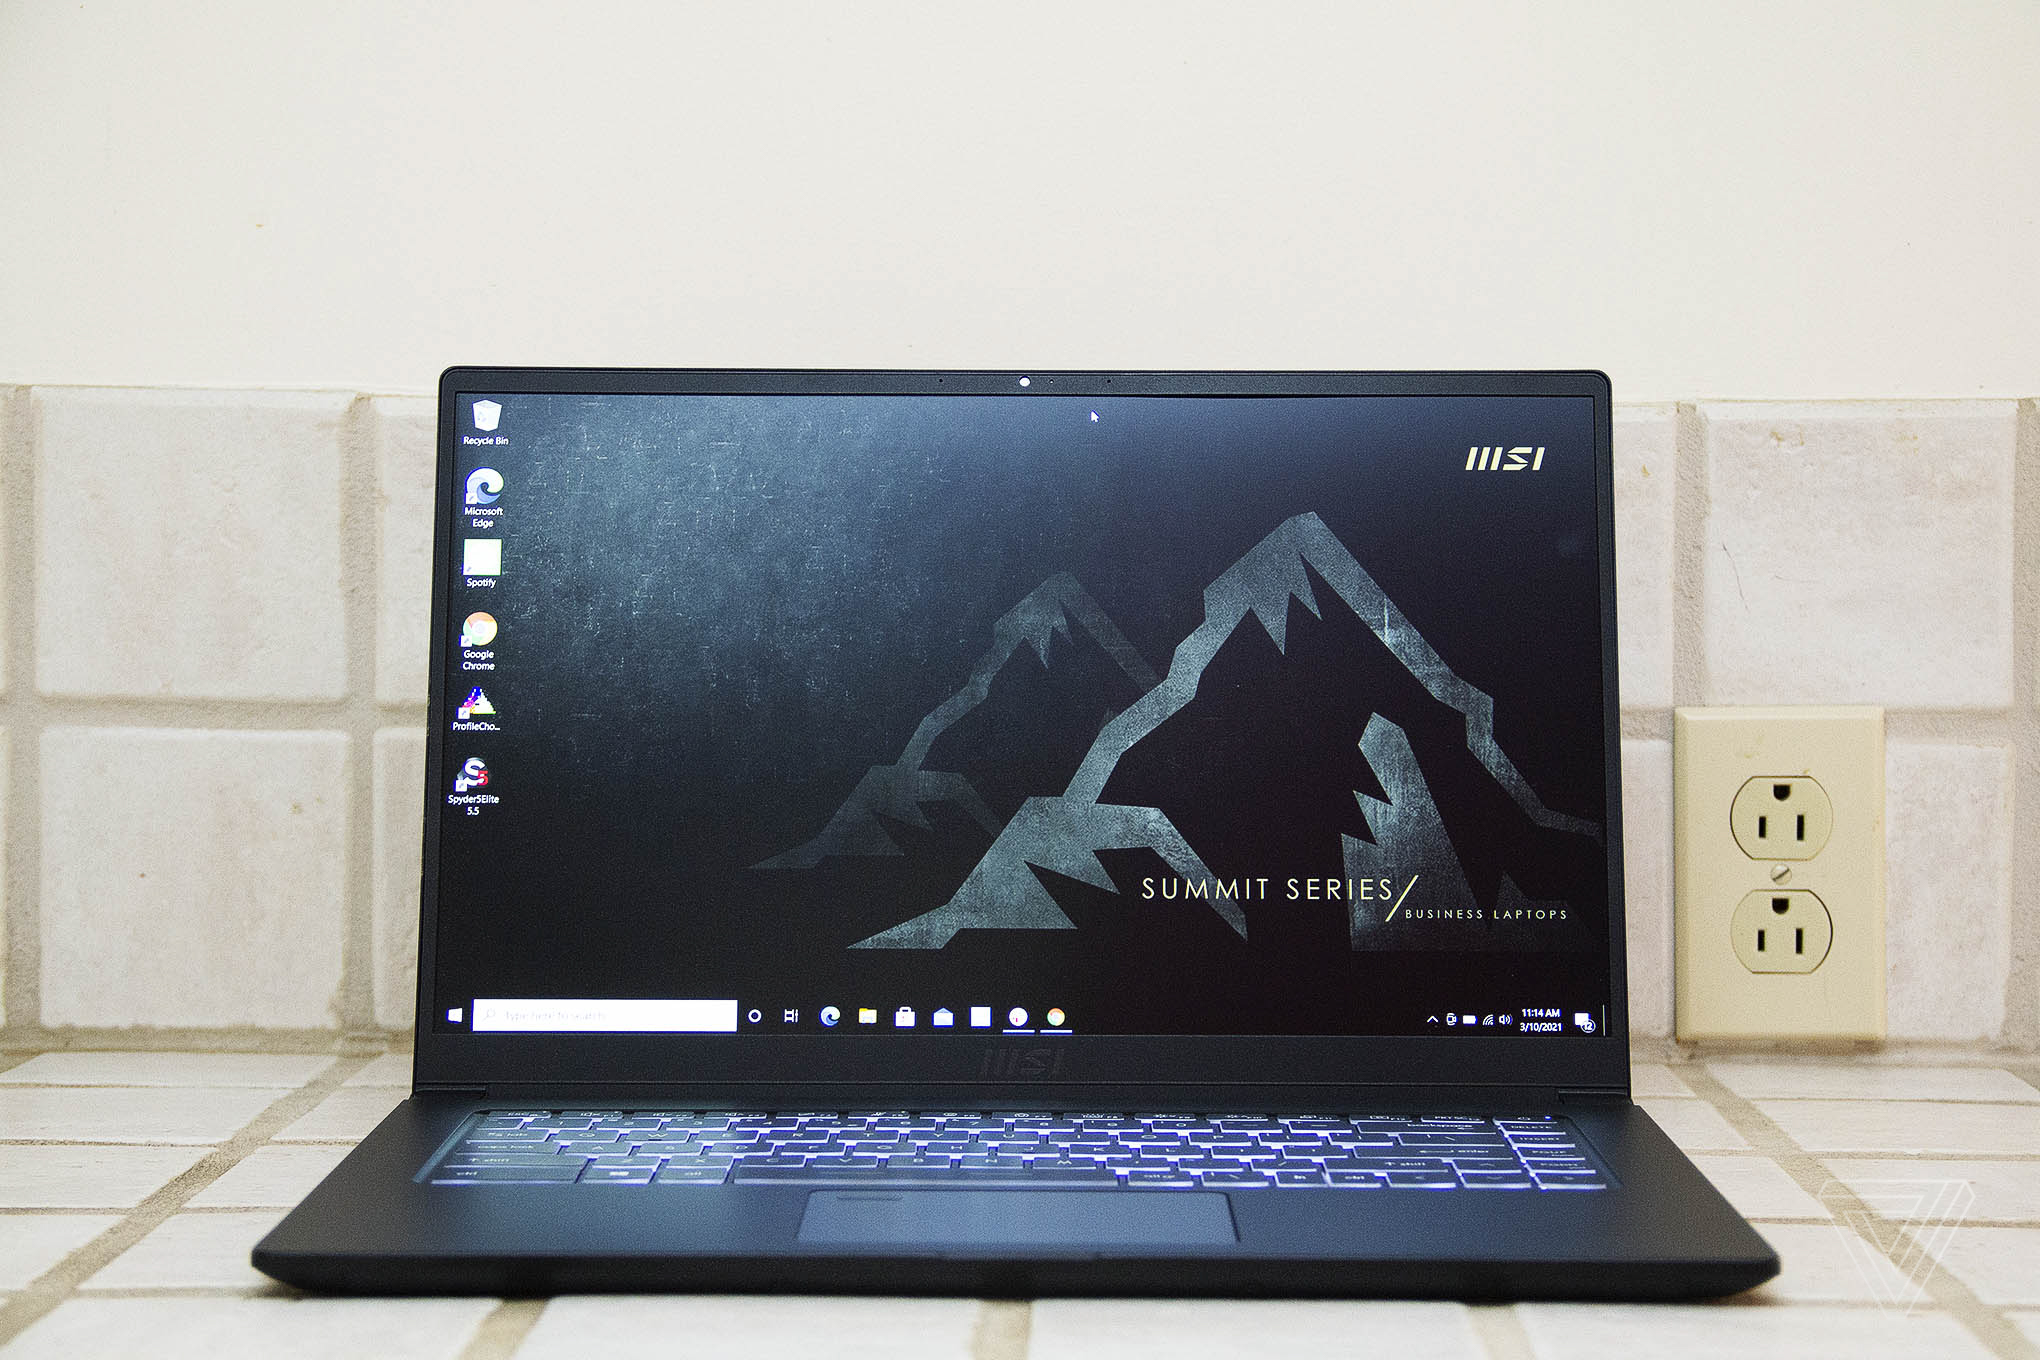 The MSI Summit B15 sits on a tiled countertop, open. The screen displays white mountains on a black background with the MSI and Summit logos.